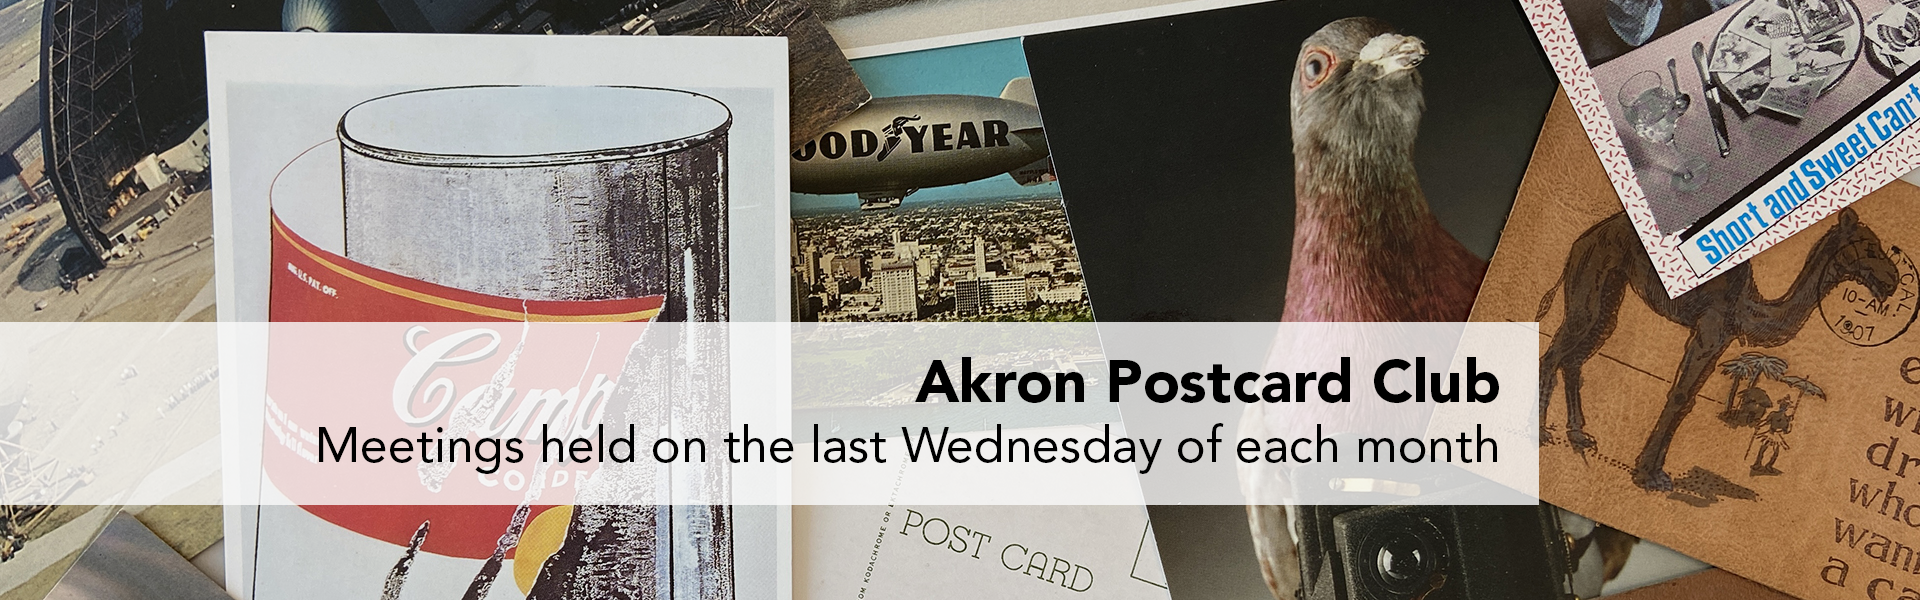 Akron Postcard Club - Last Wednesday of Each Month